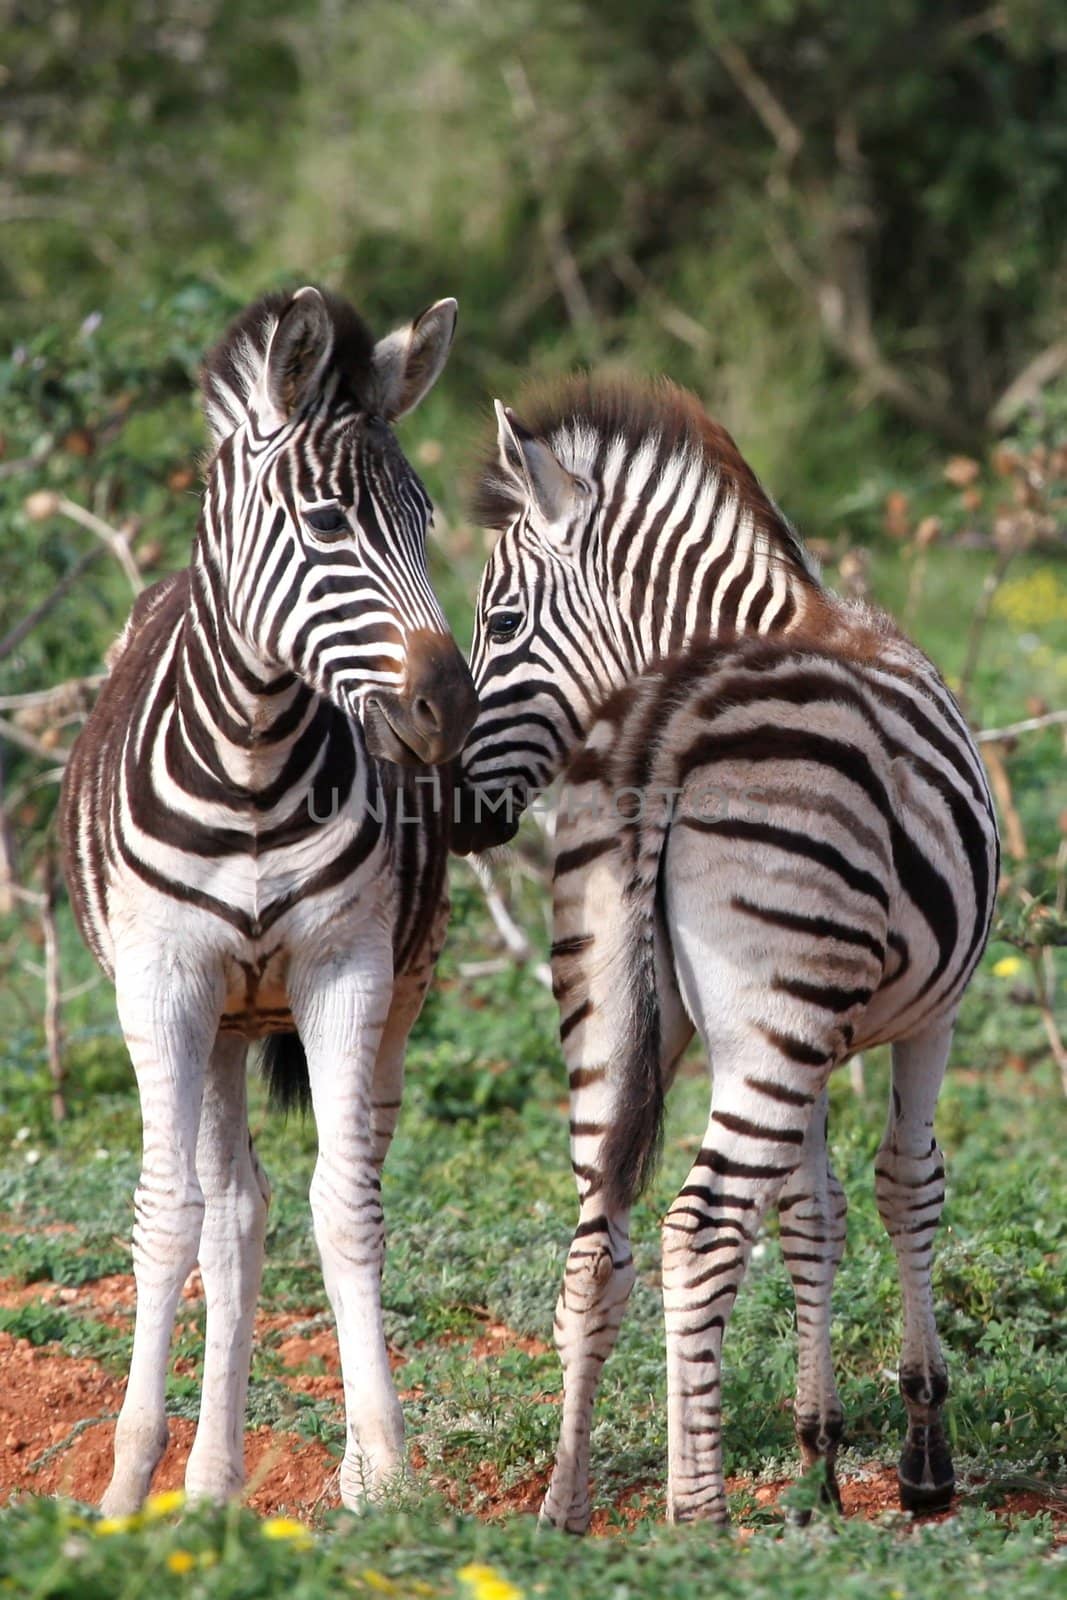 Two cute young zebra foals standing together